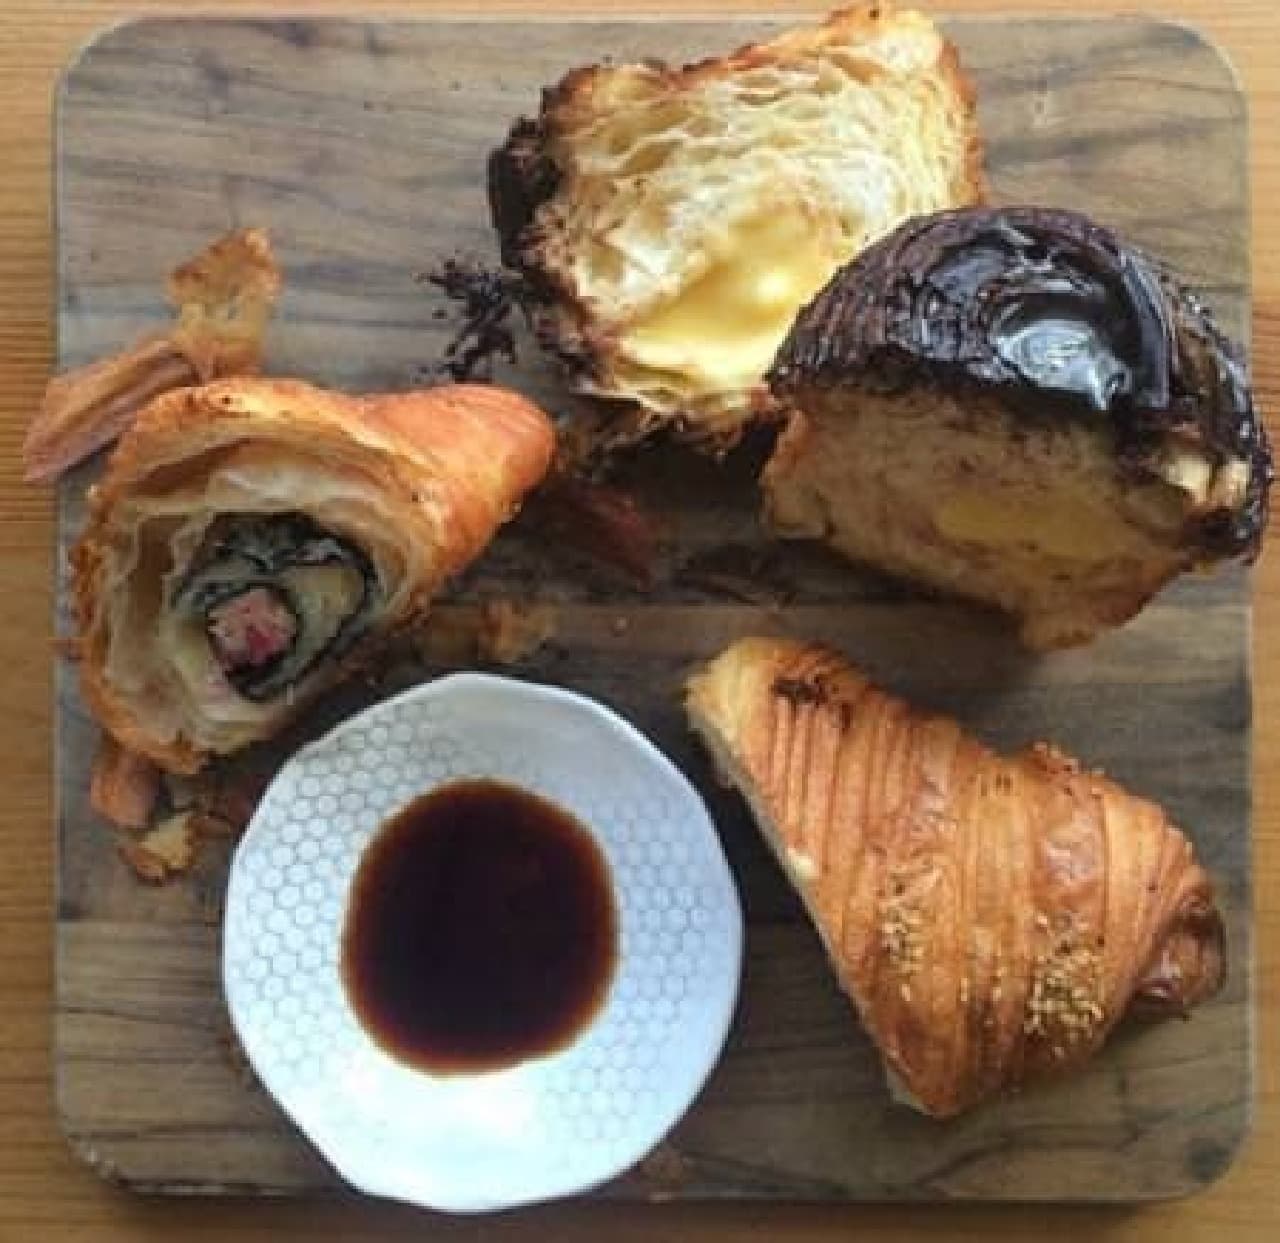 A new sensation of eating croissants with soy sauce